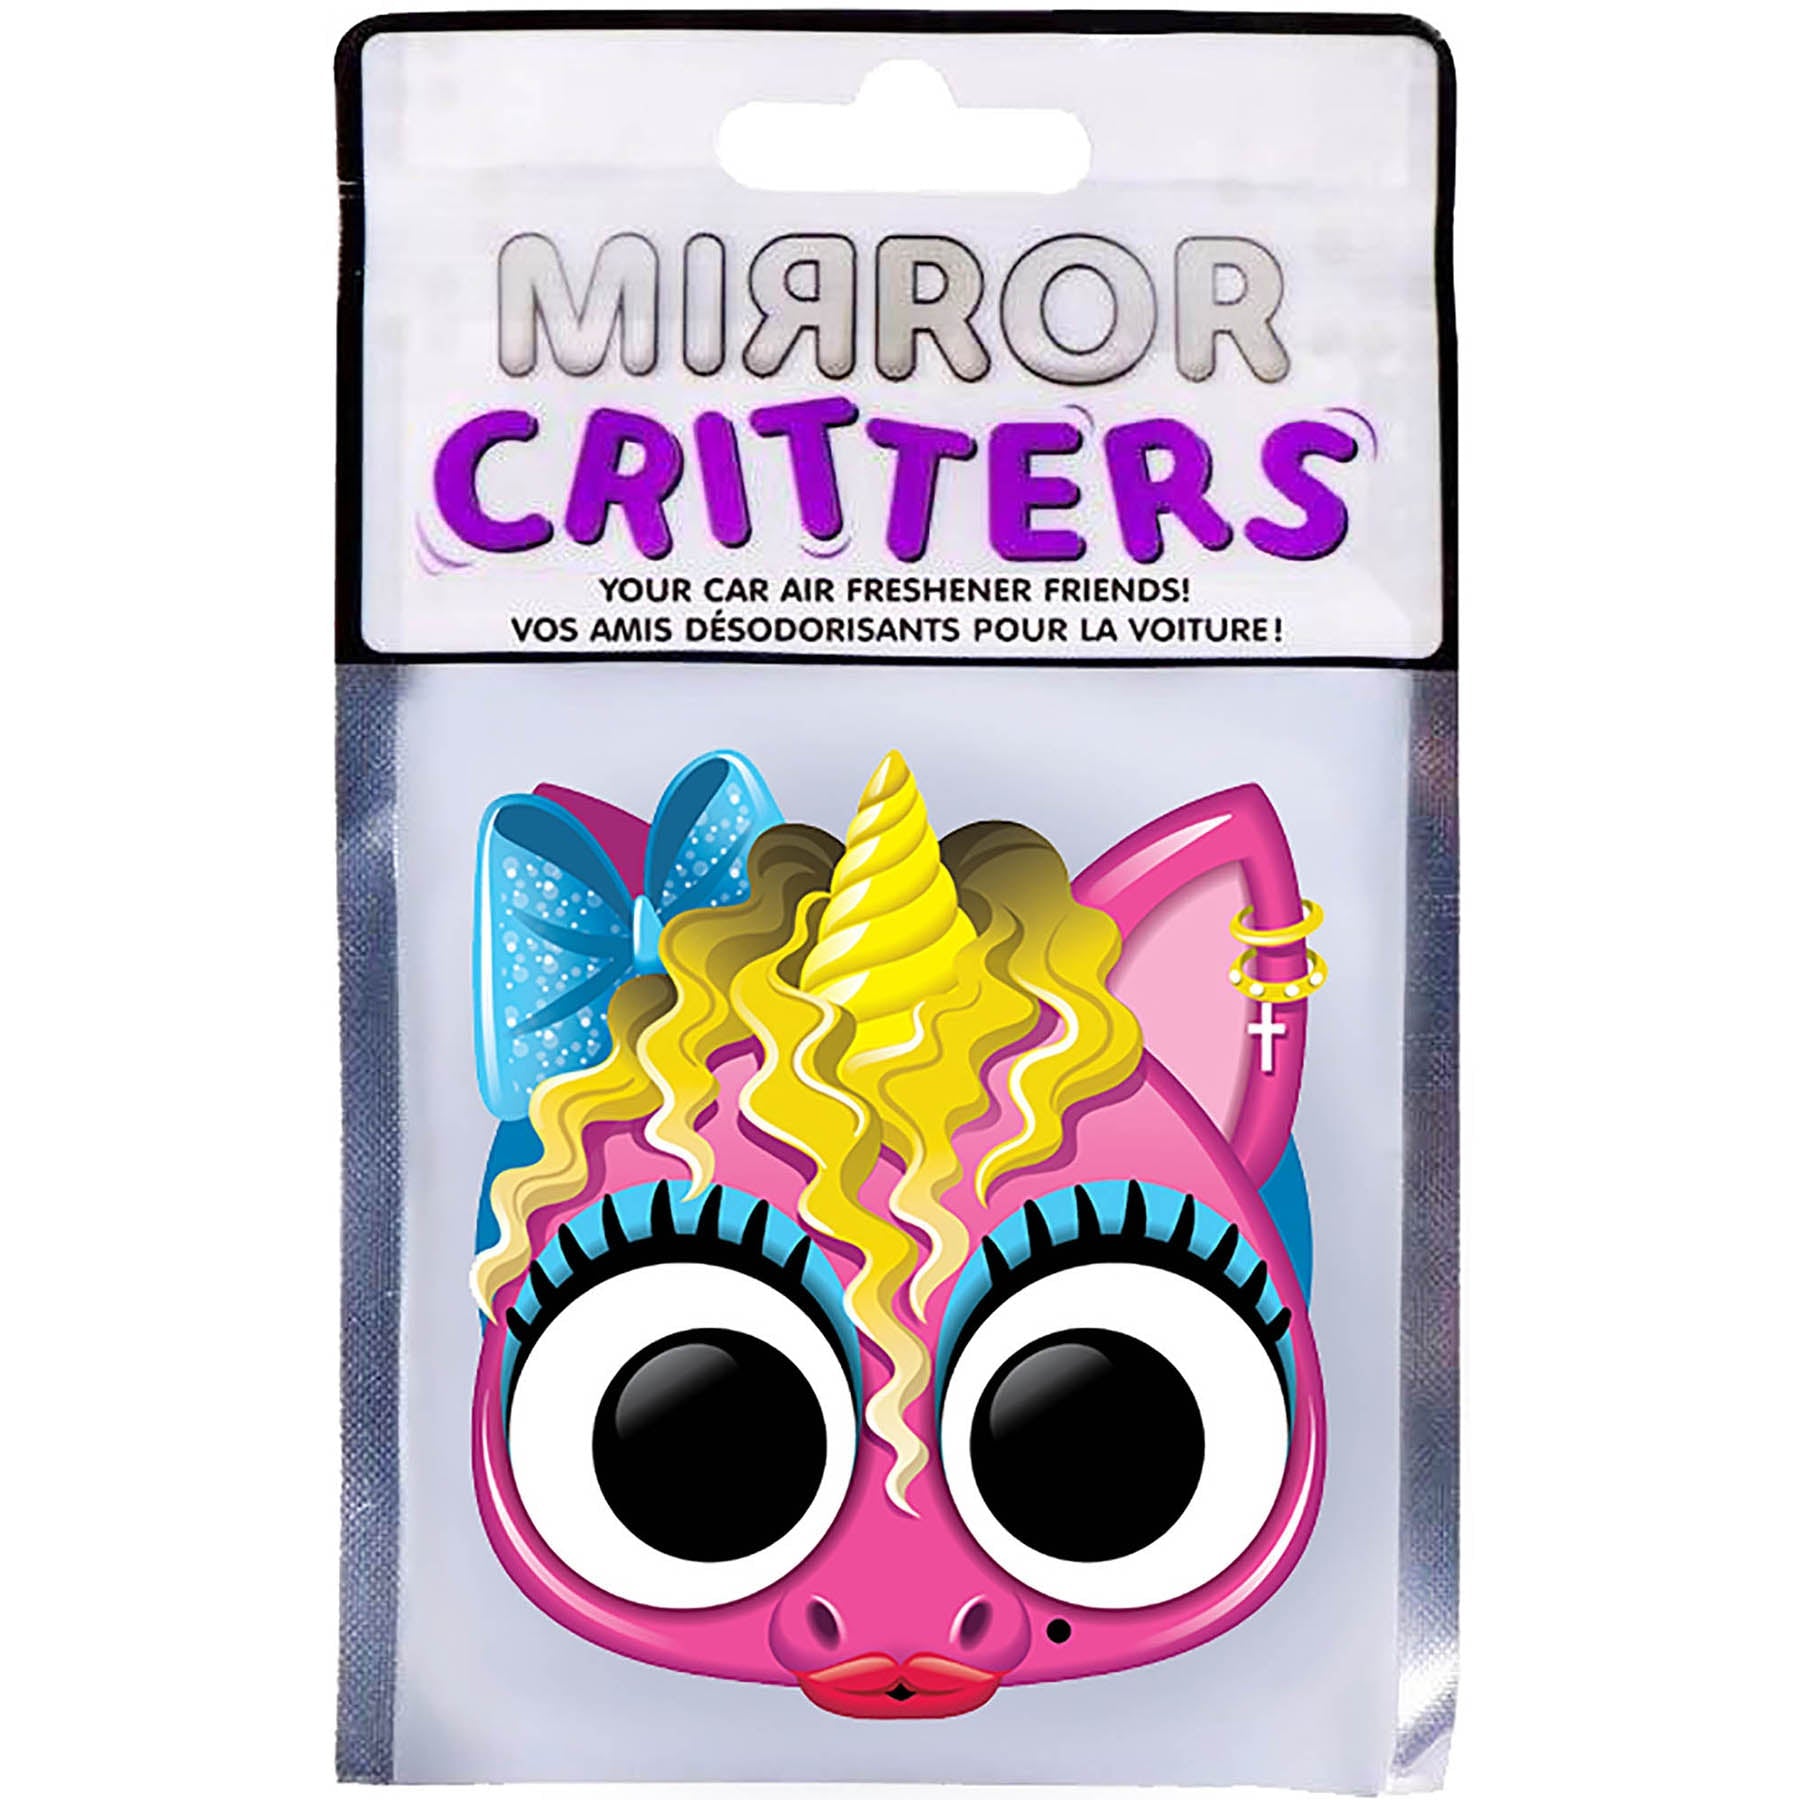 Mirror Critters Car Air Freshener Maddon-Icorn - Cotton Candy Fragrance 3.5x3in